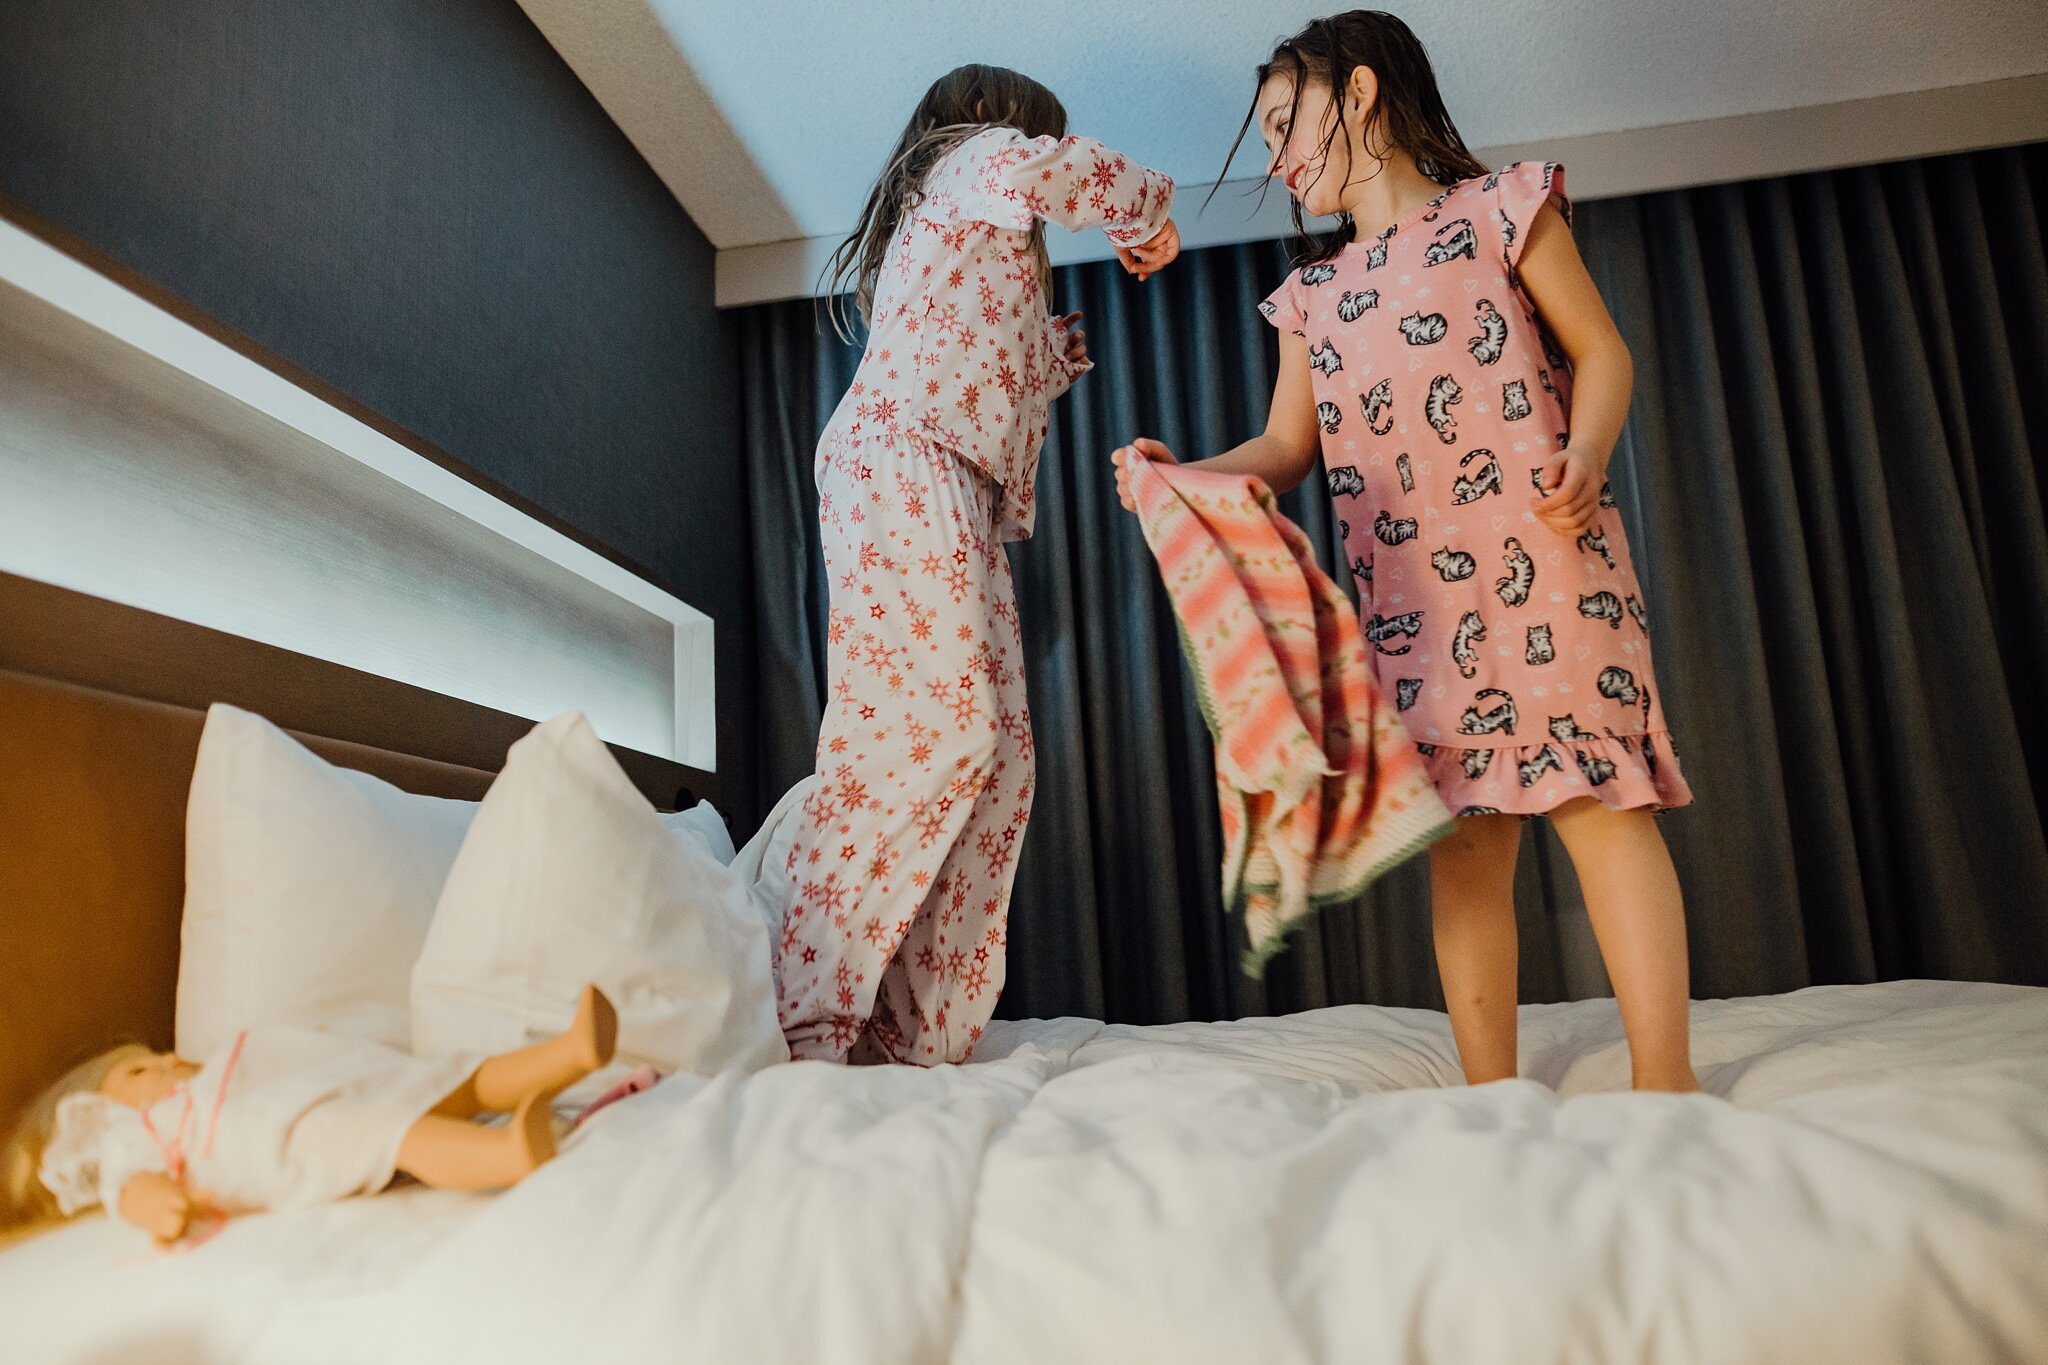 girls jump on bed in hotel